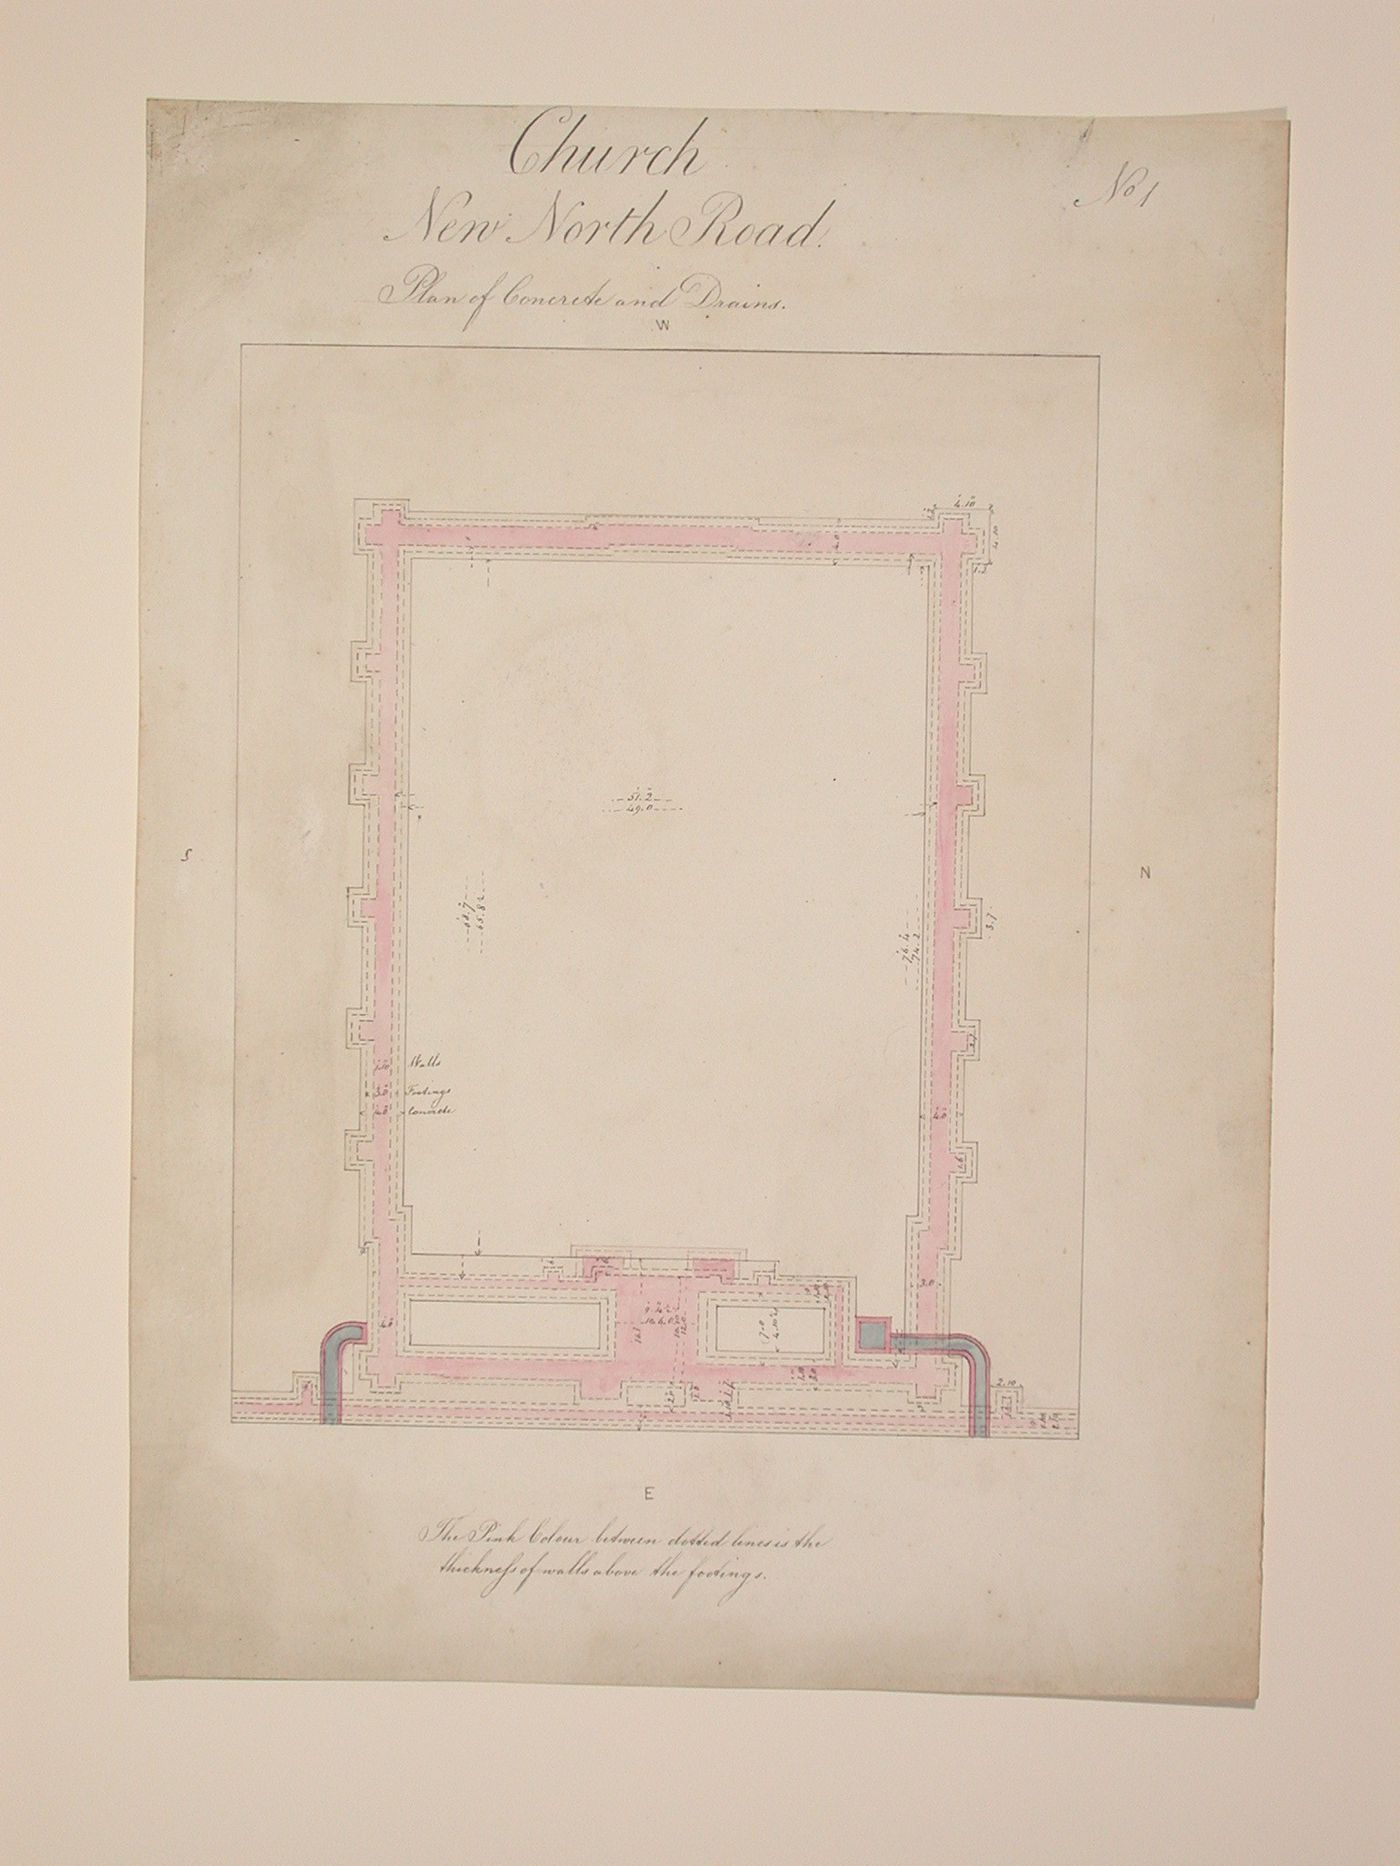 Church-New North Road-No.1Plan of Concrete and Drains